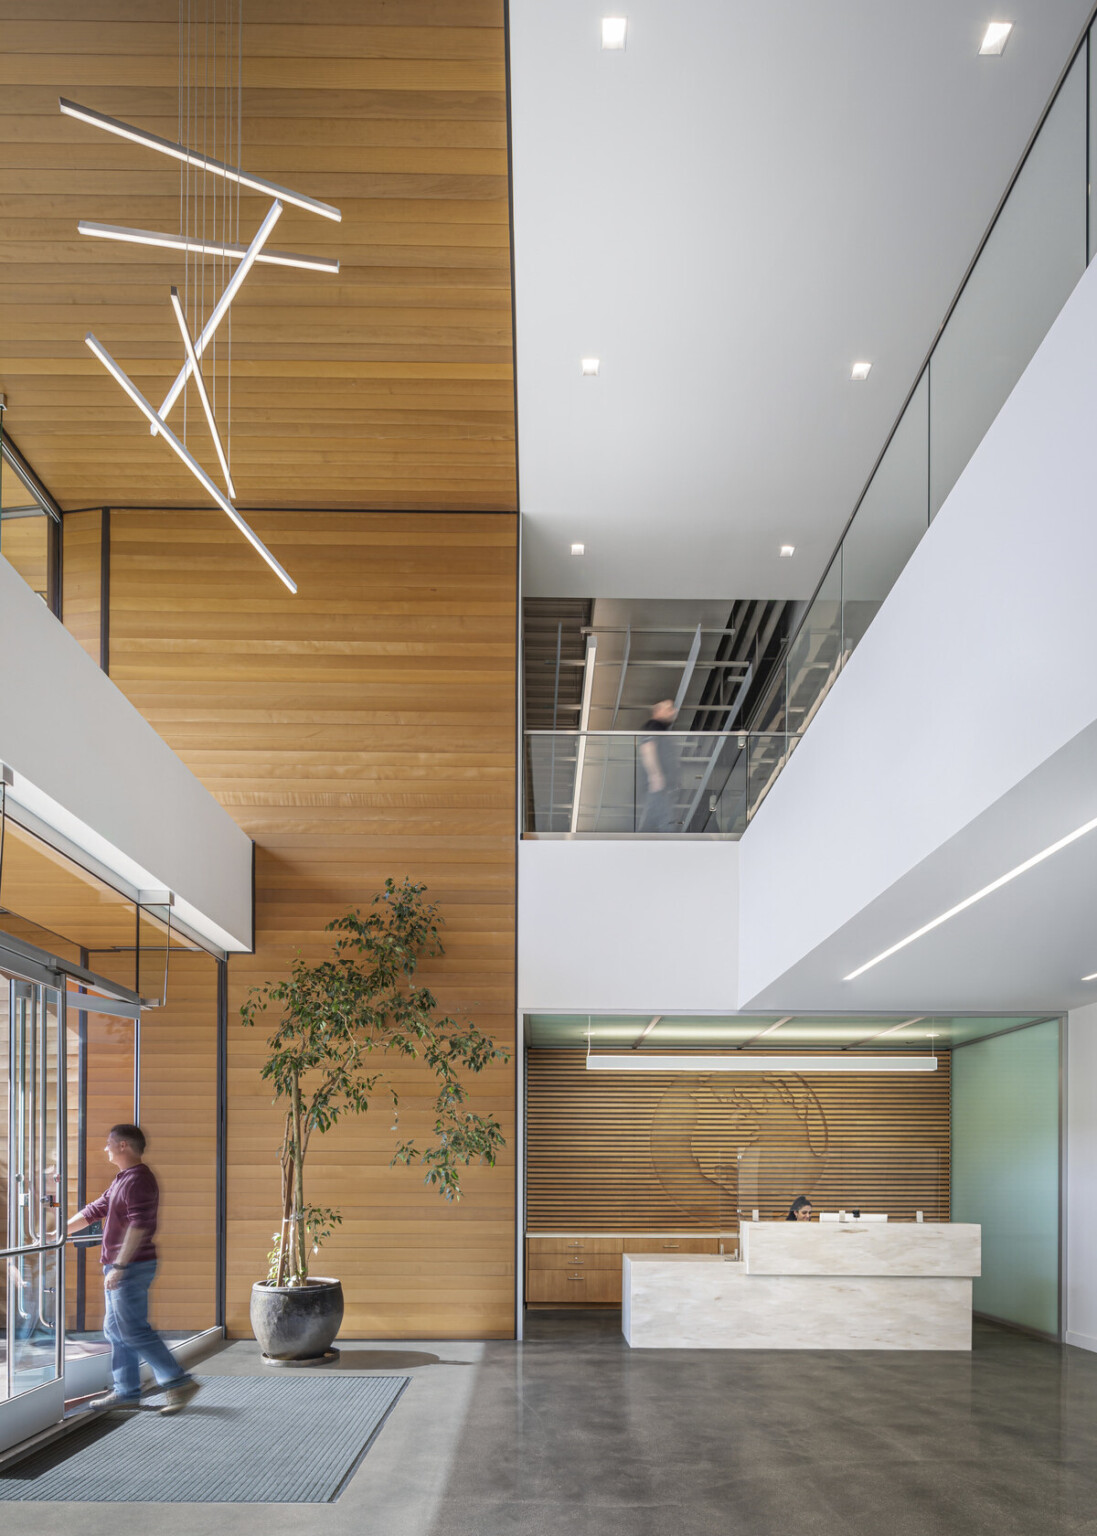 Double height entry lobby with wood panel and white balcony with glass rail. Large windows and hanging sculpture